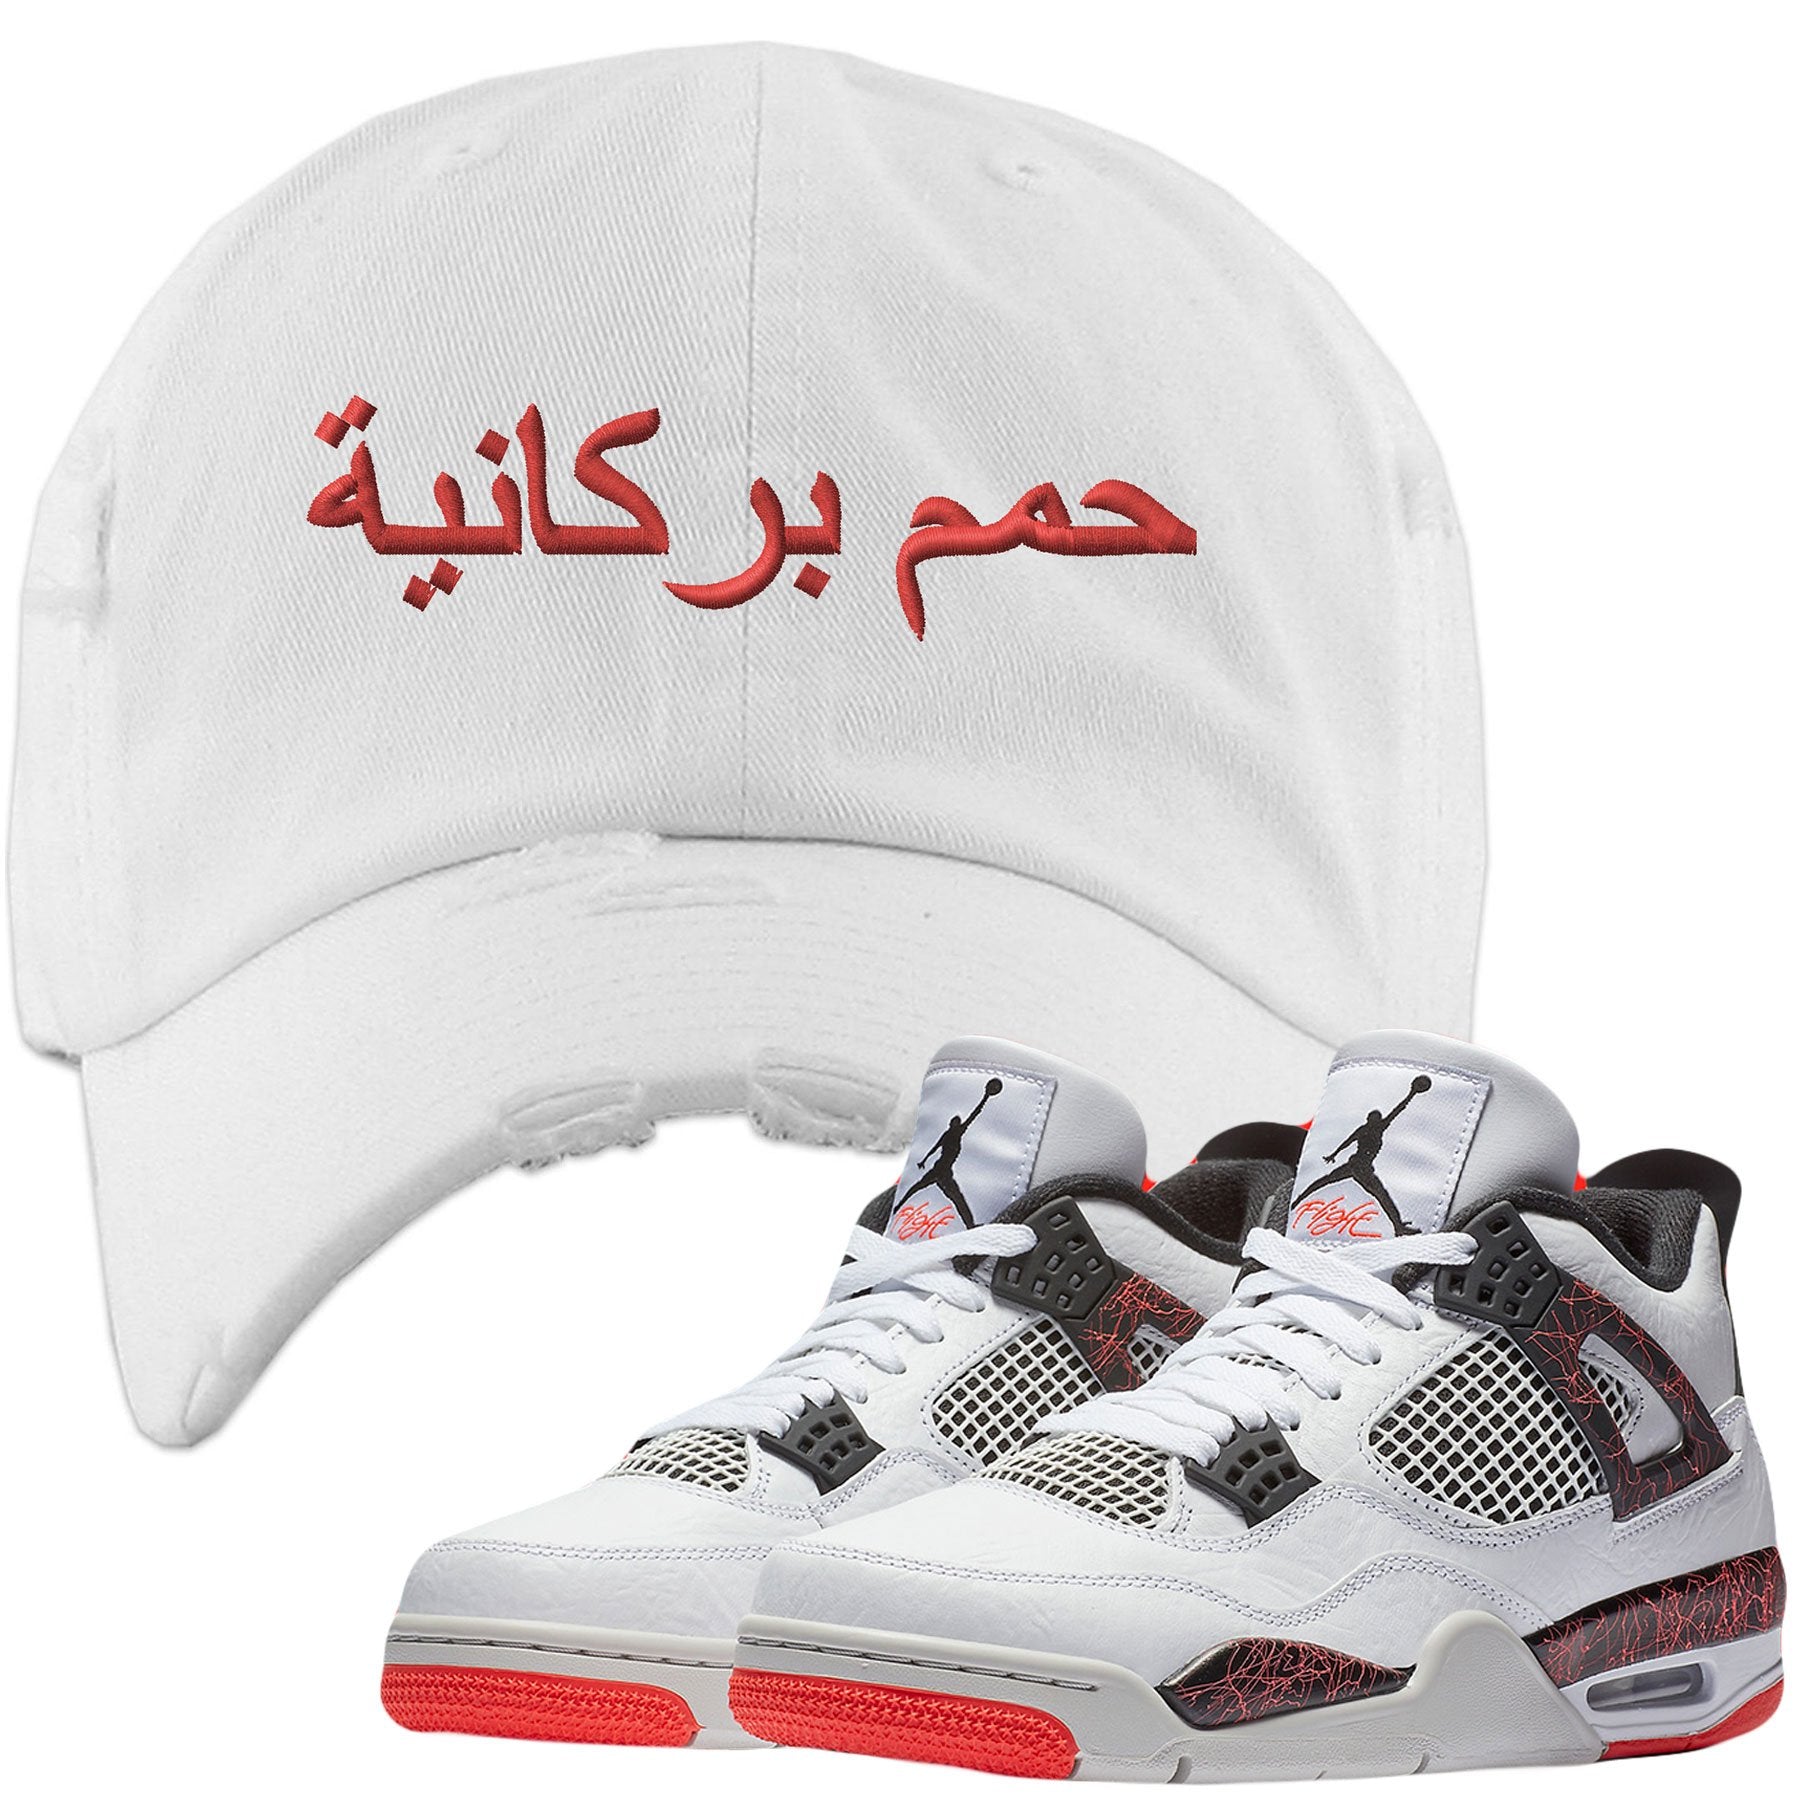 Match your pair of Jordan 4 Pale Citron "Hot Lava 4s" sneakers with this sneaker matching distressed dad hat